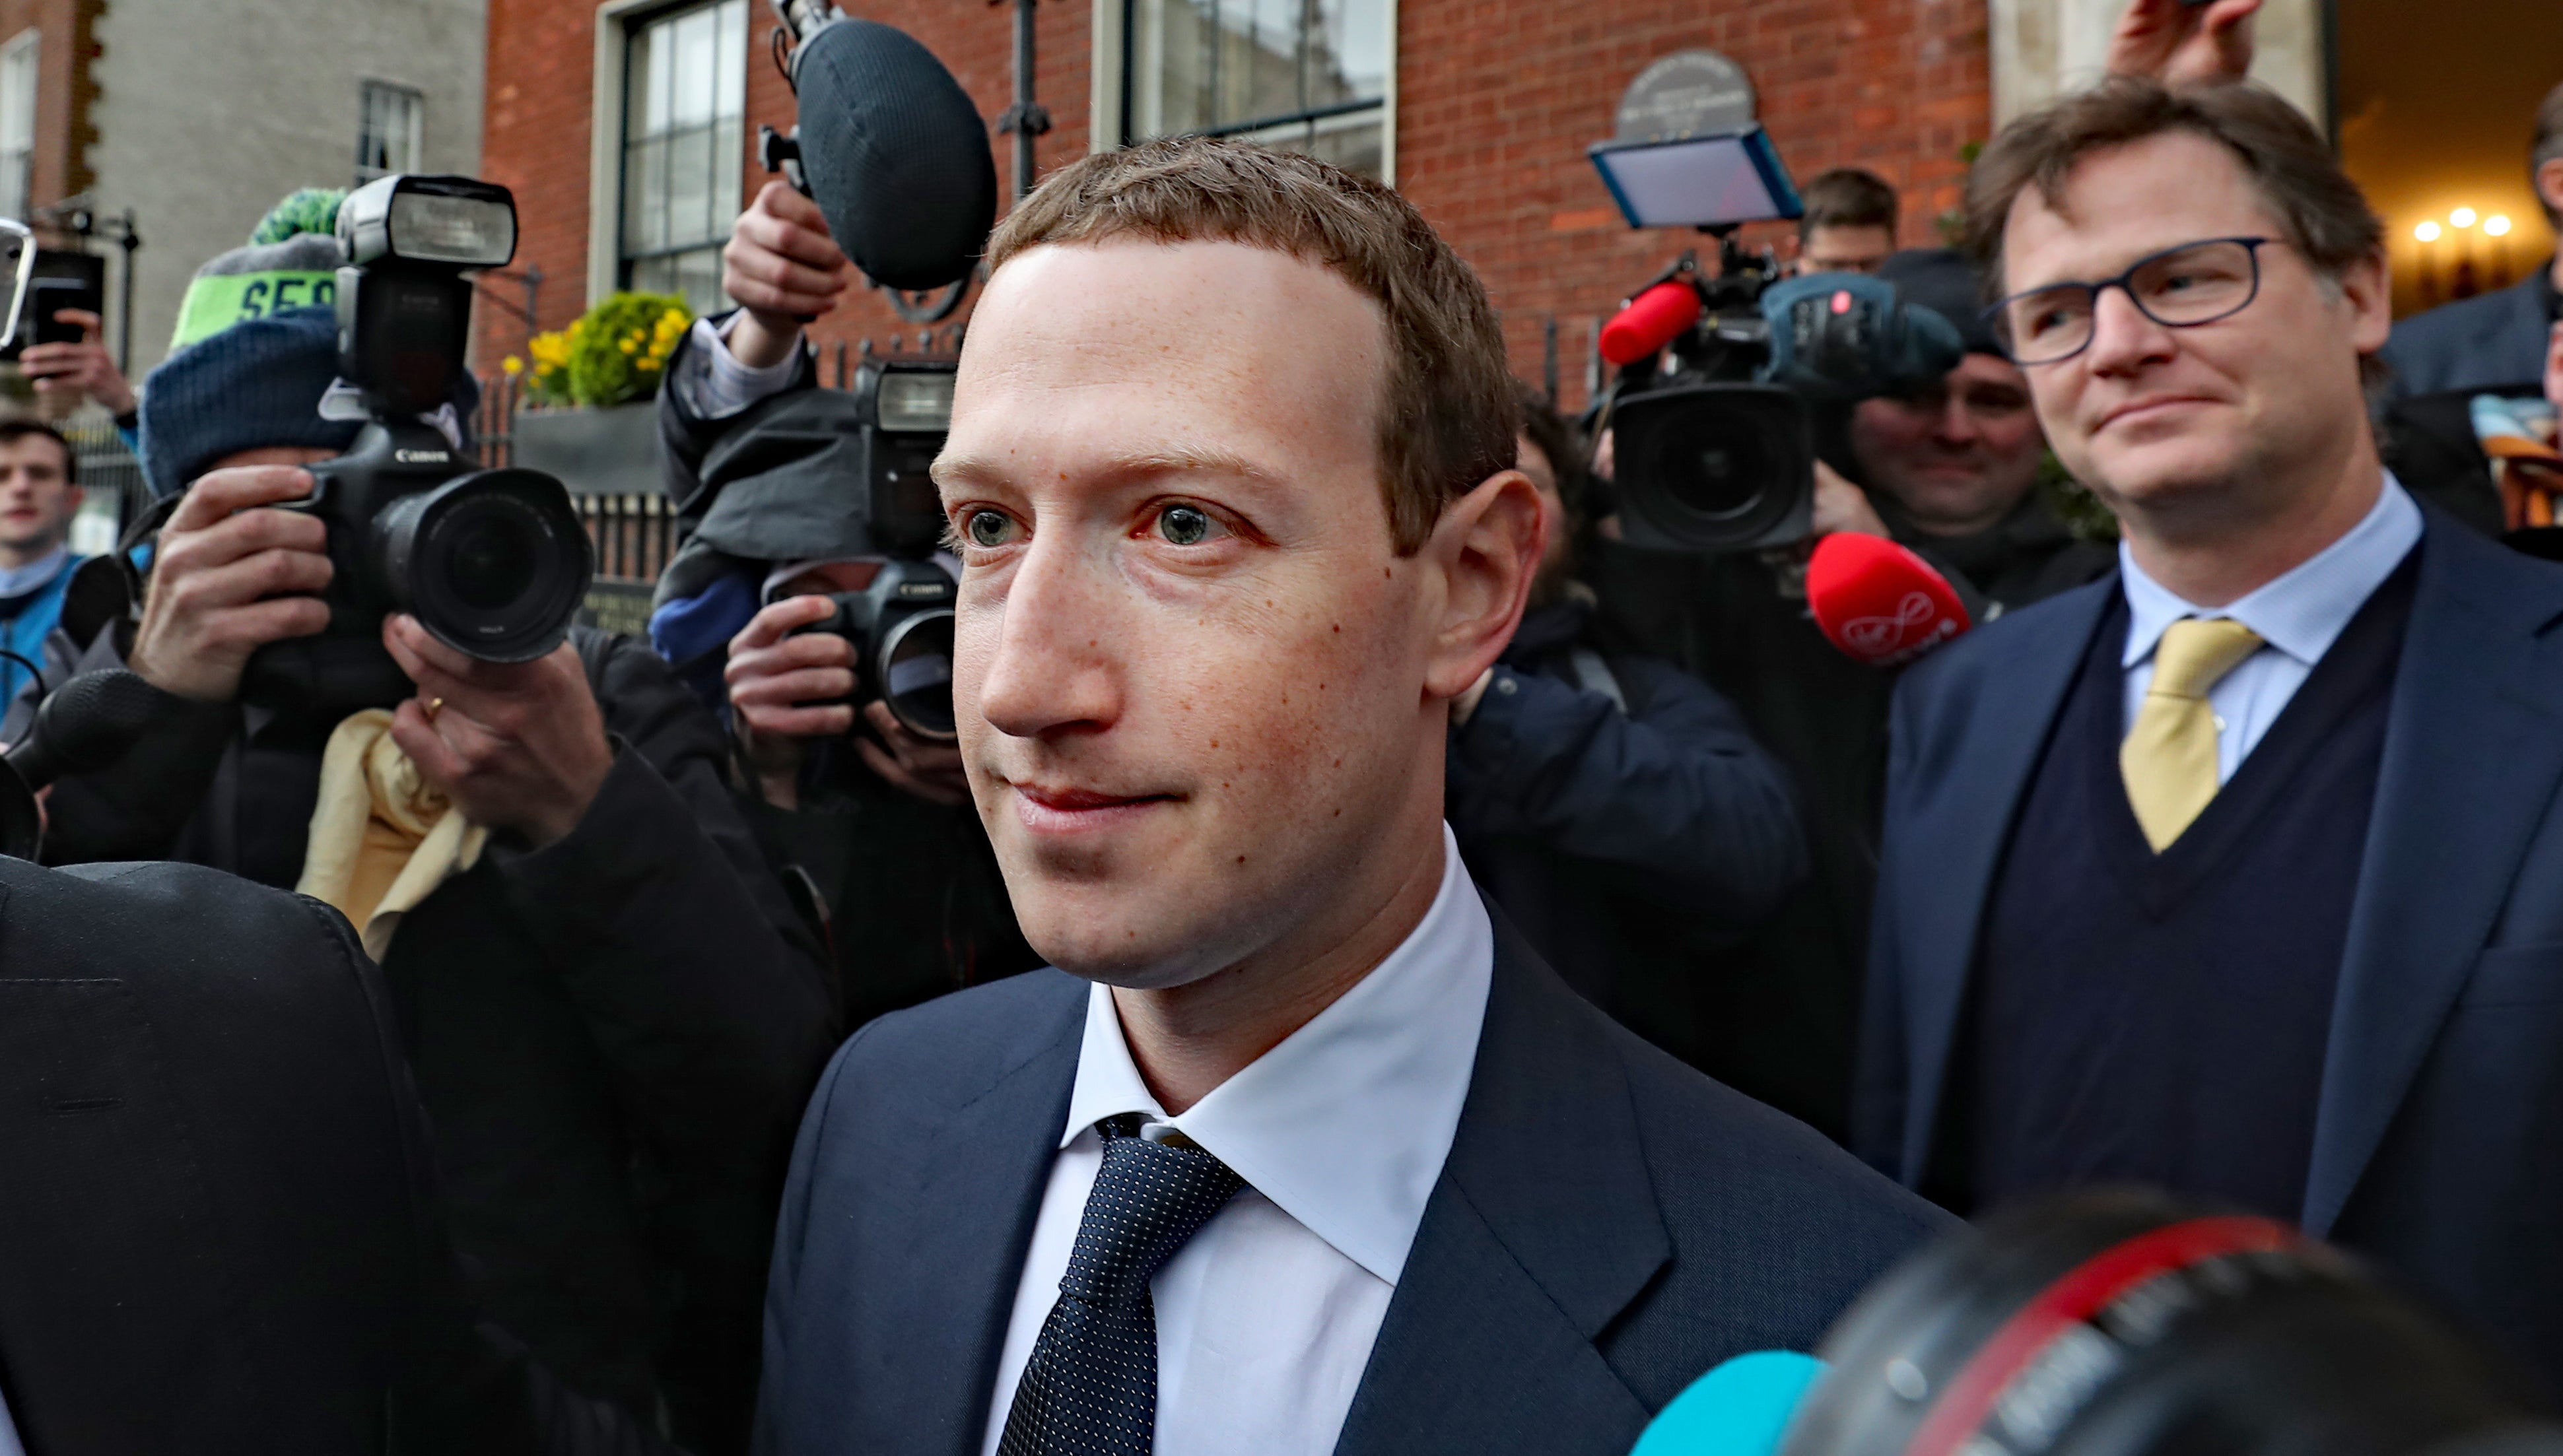 Facebook CEO Mark Zuckerberg leaving The Merrion Hotel in Dublin with as its head of global policy and communications Nick Clegg after a meeting with politicians to discuss regulation of social media and harmful content.